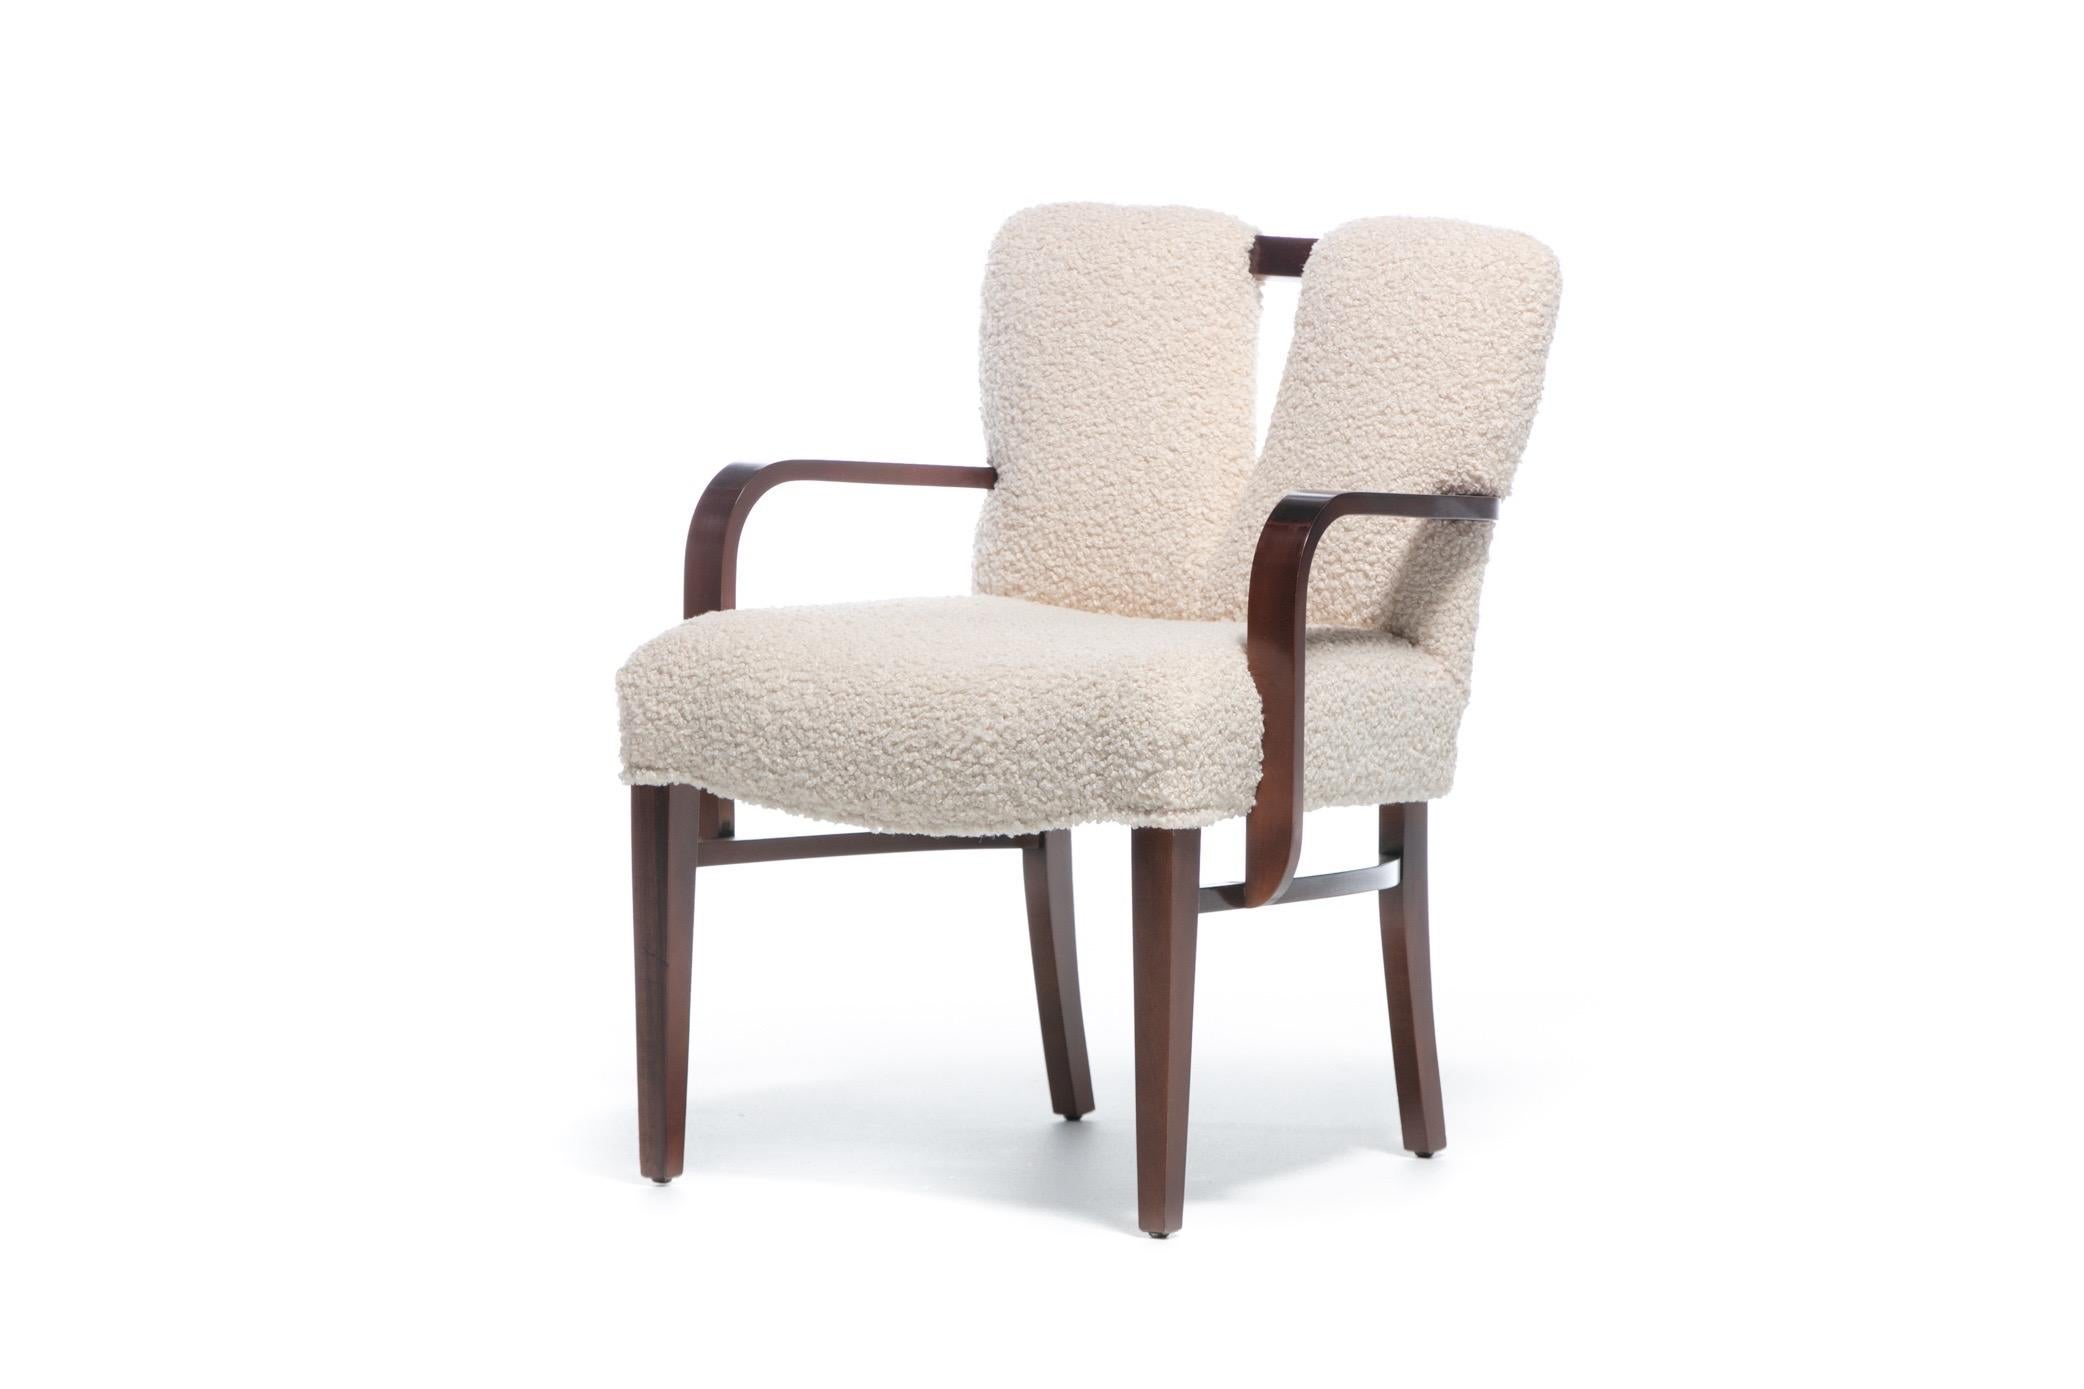 Mid-20th Century Set of 18 Paul Frankl Corset Back Dining Chairs in Ivory White Bouclé, c. 1950s